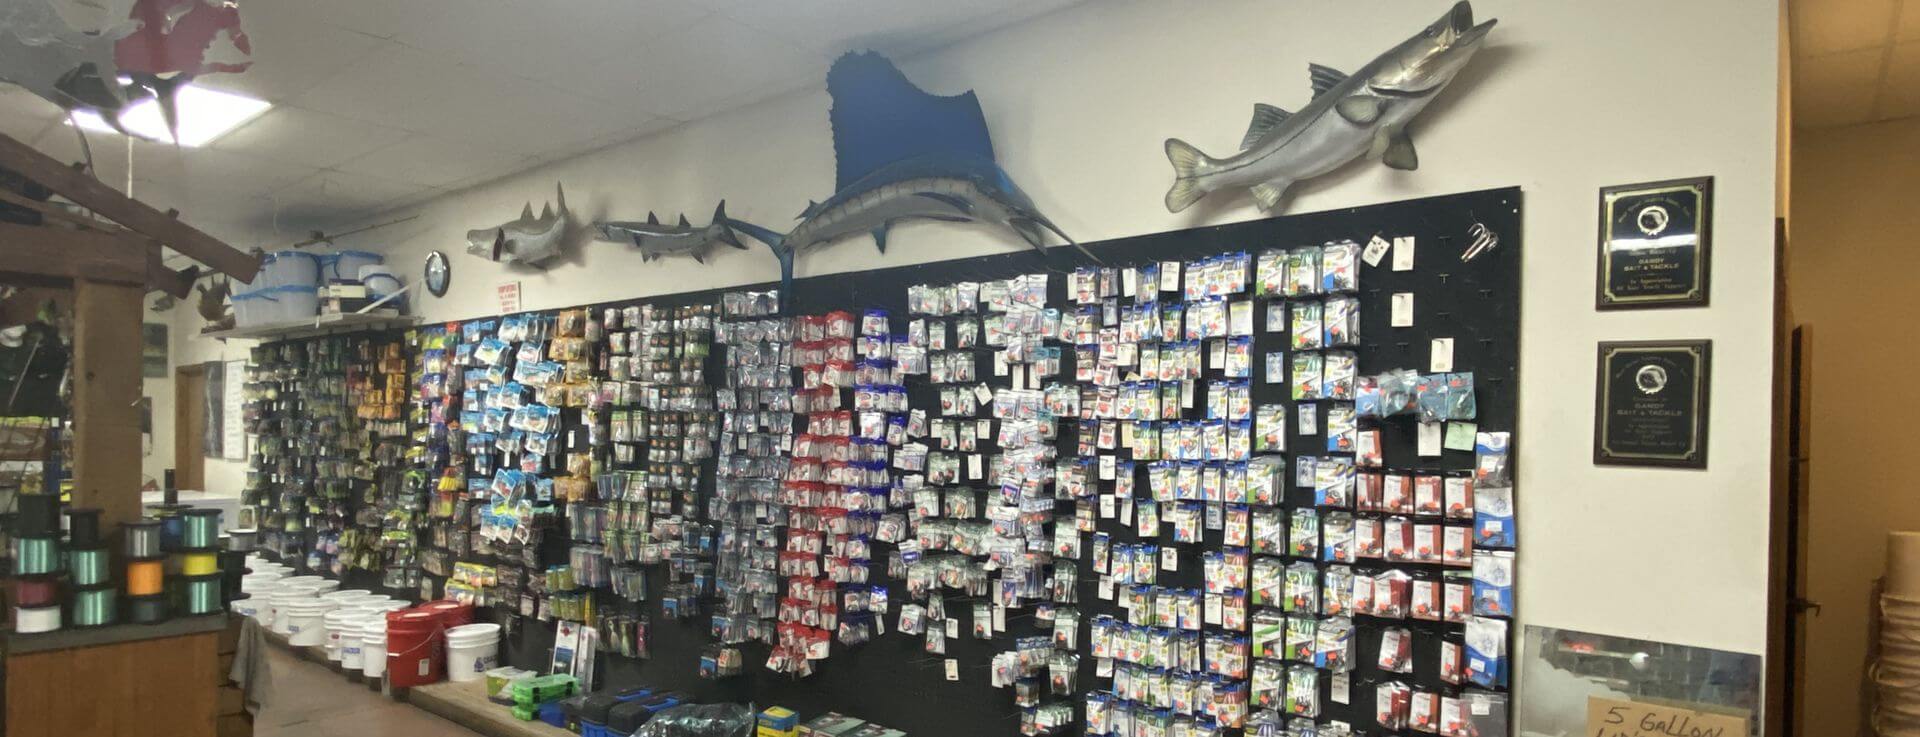 Fishing hooks at Gandy bait and tackle shop